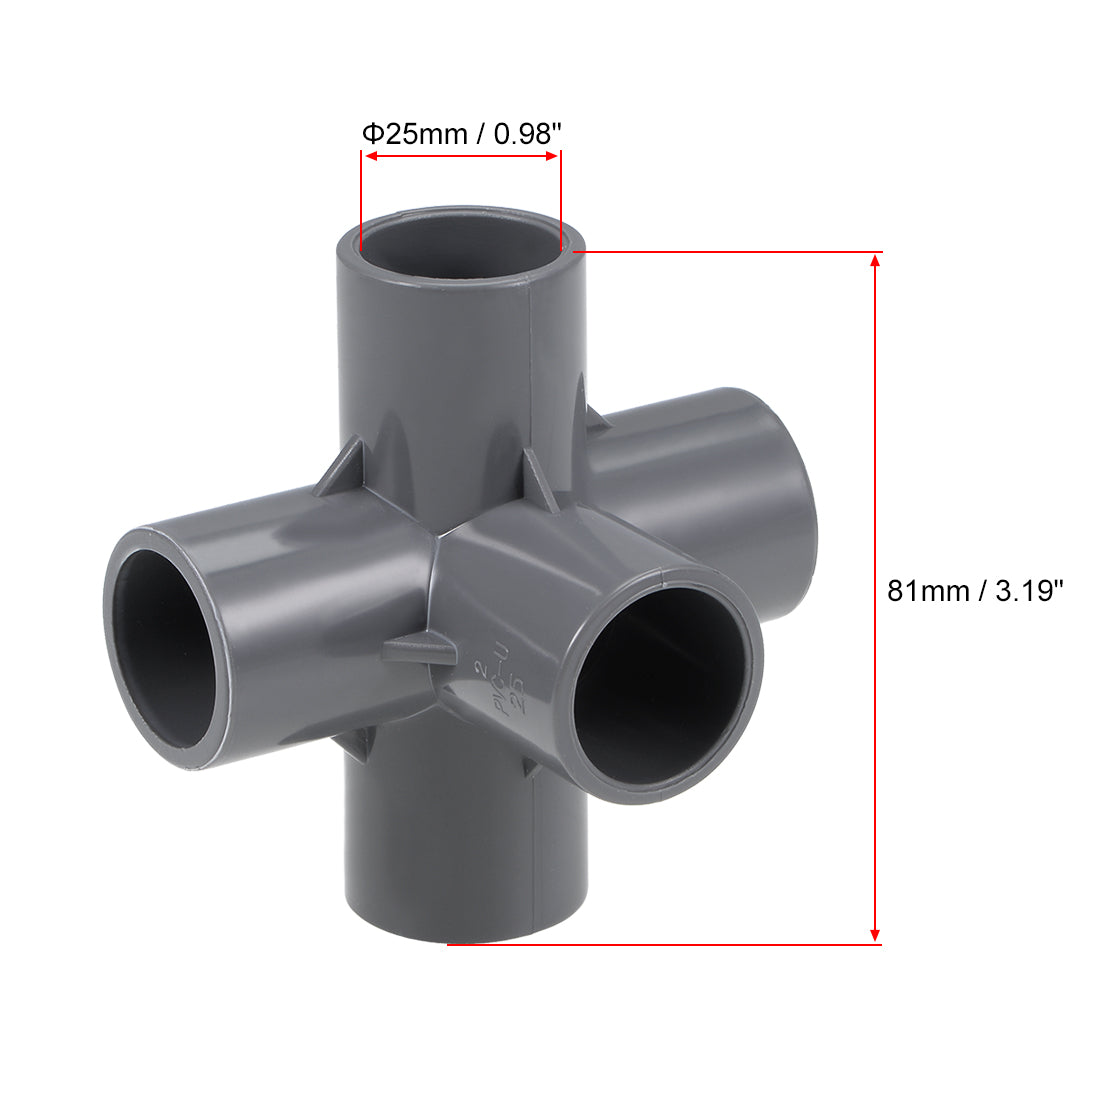 uxcell Uxcell 5 Way 25mm Tee Metric PVC Fitting Elbow - PVC Furniture Elbow Fittings Gray 2Pcs